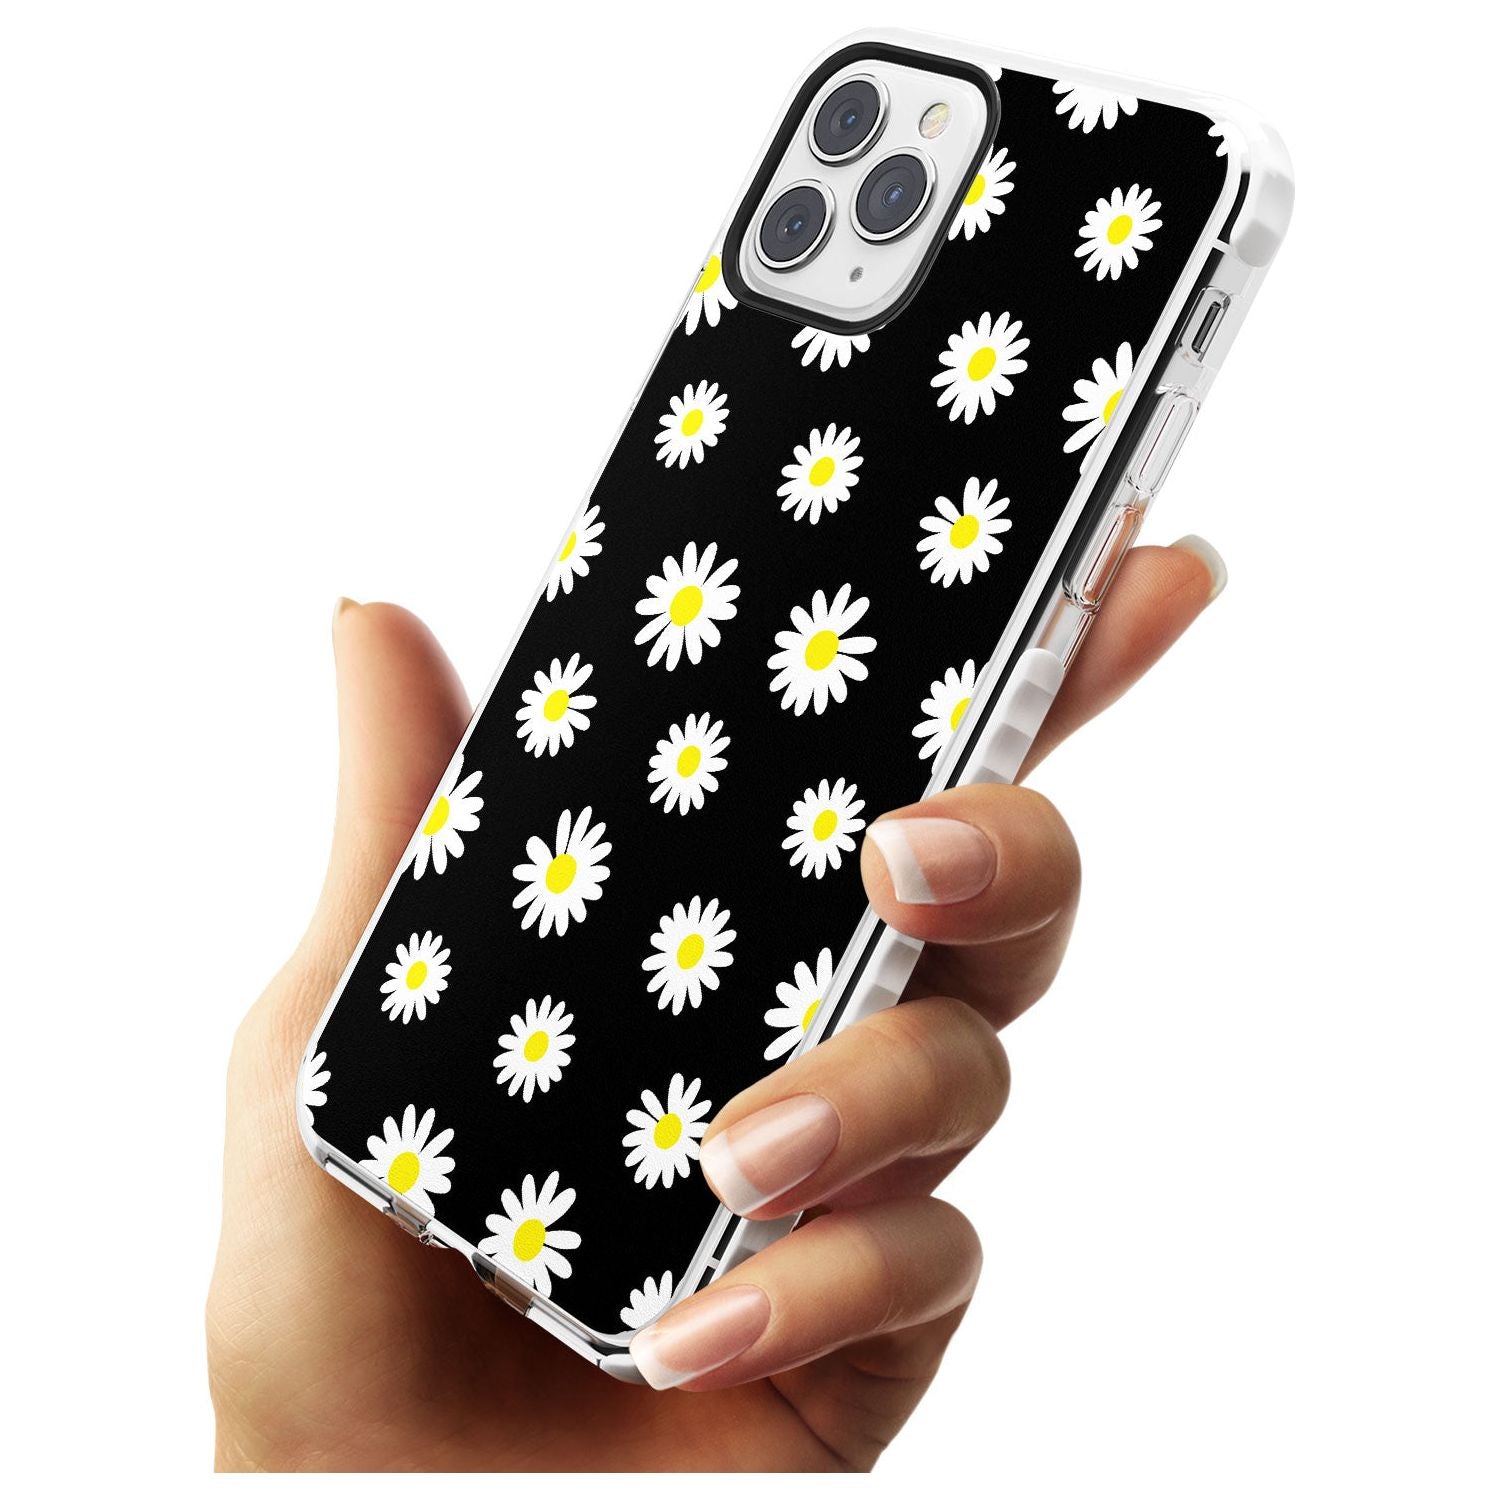 White Daisy Pattern (Black) Impact Phone Case for iPhone 11 Pro Max